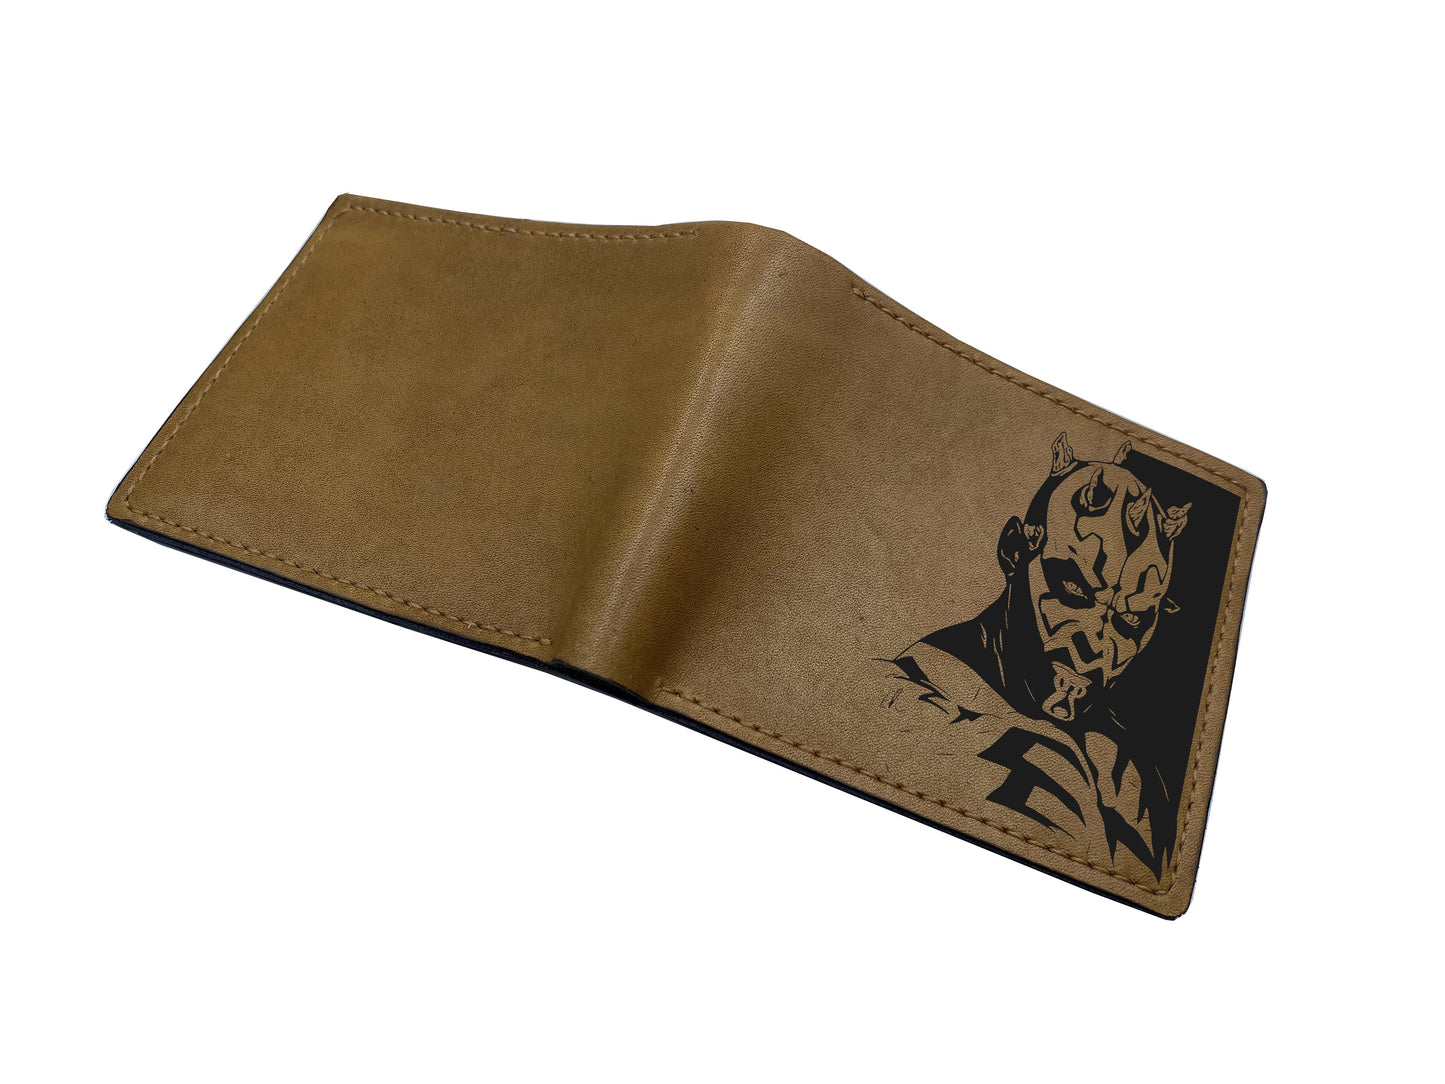 Qui-Gon Jinn Jedi master drawing, Starwars art present for men, leather men wallet, customized christmas gift ideas for him